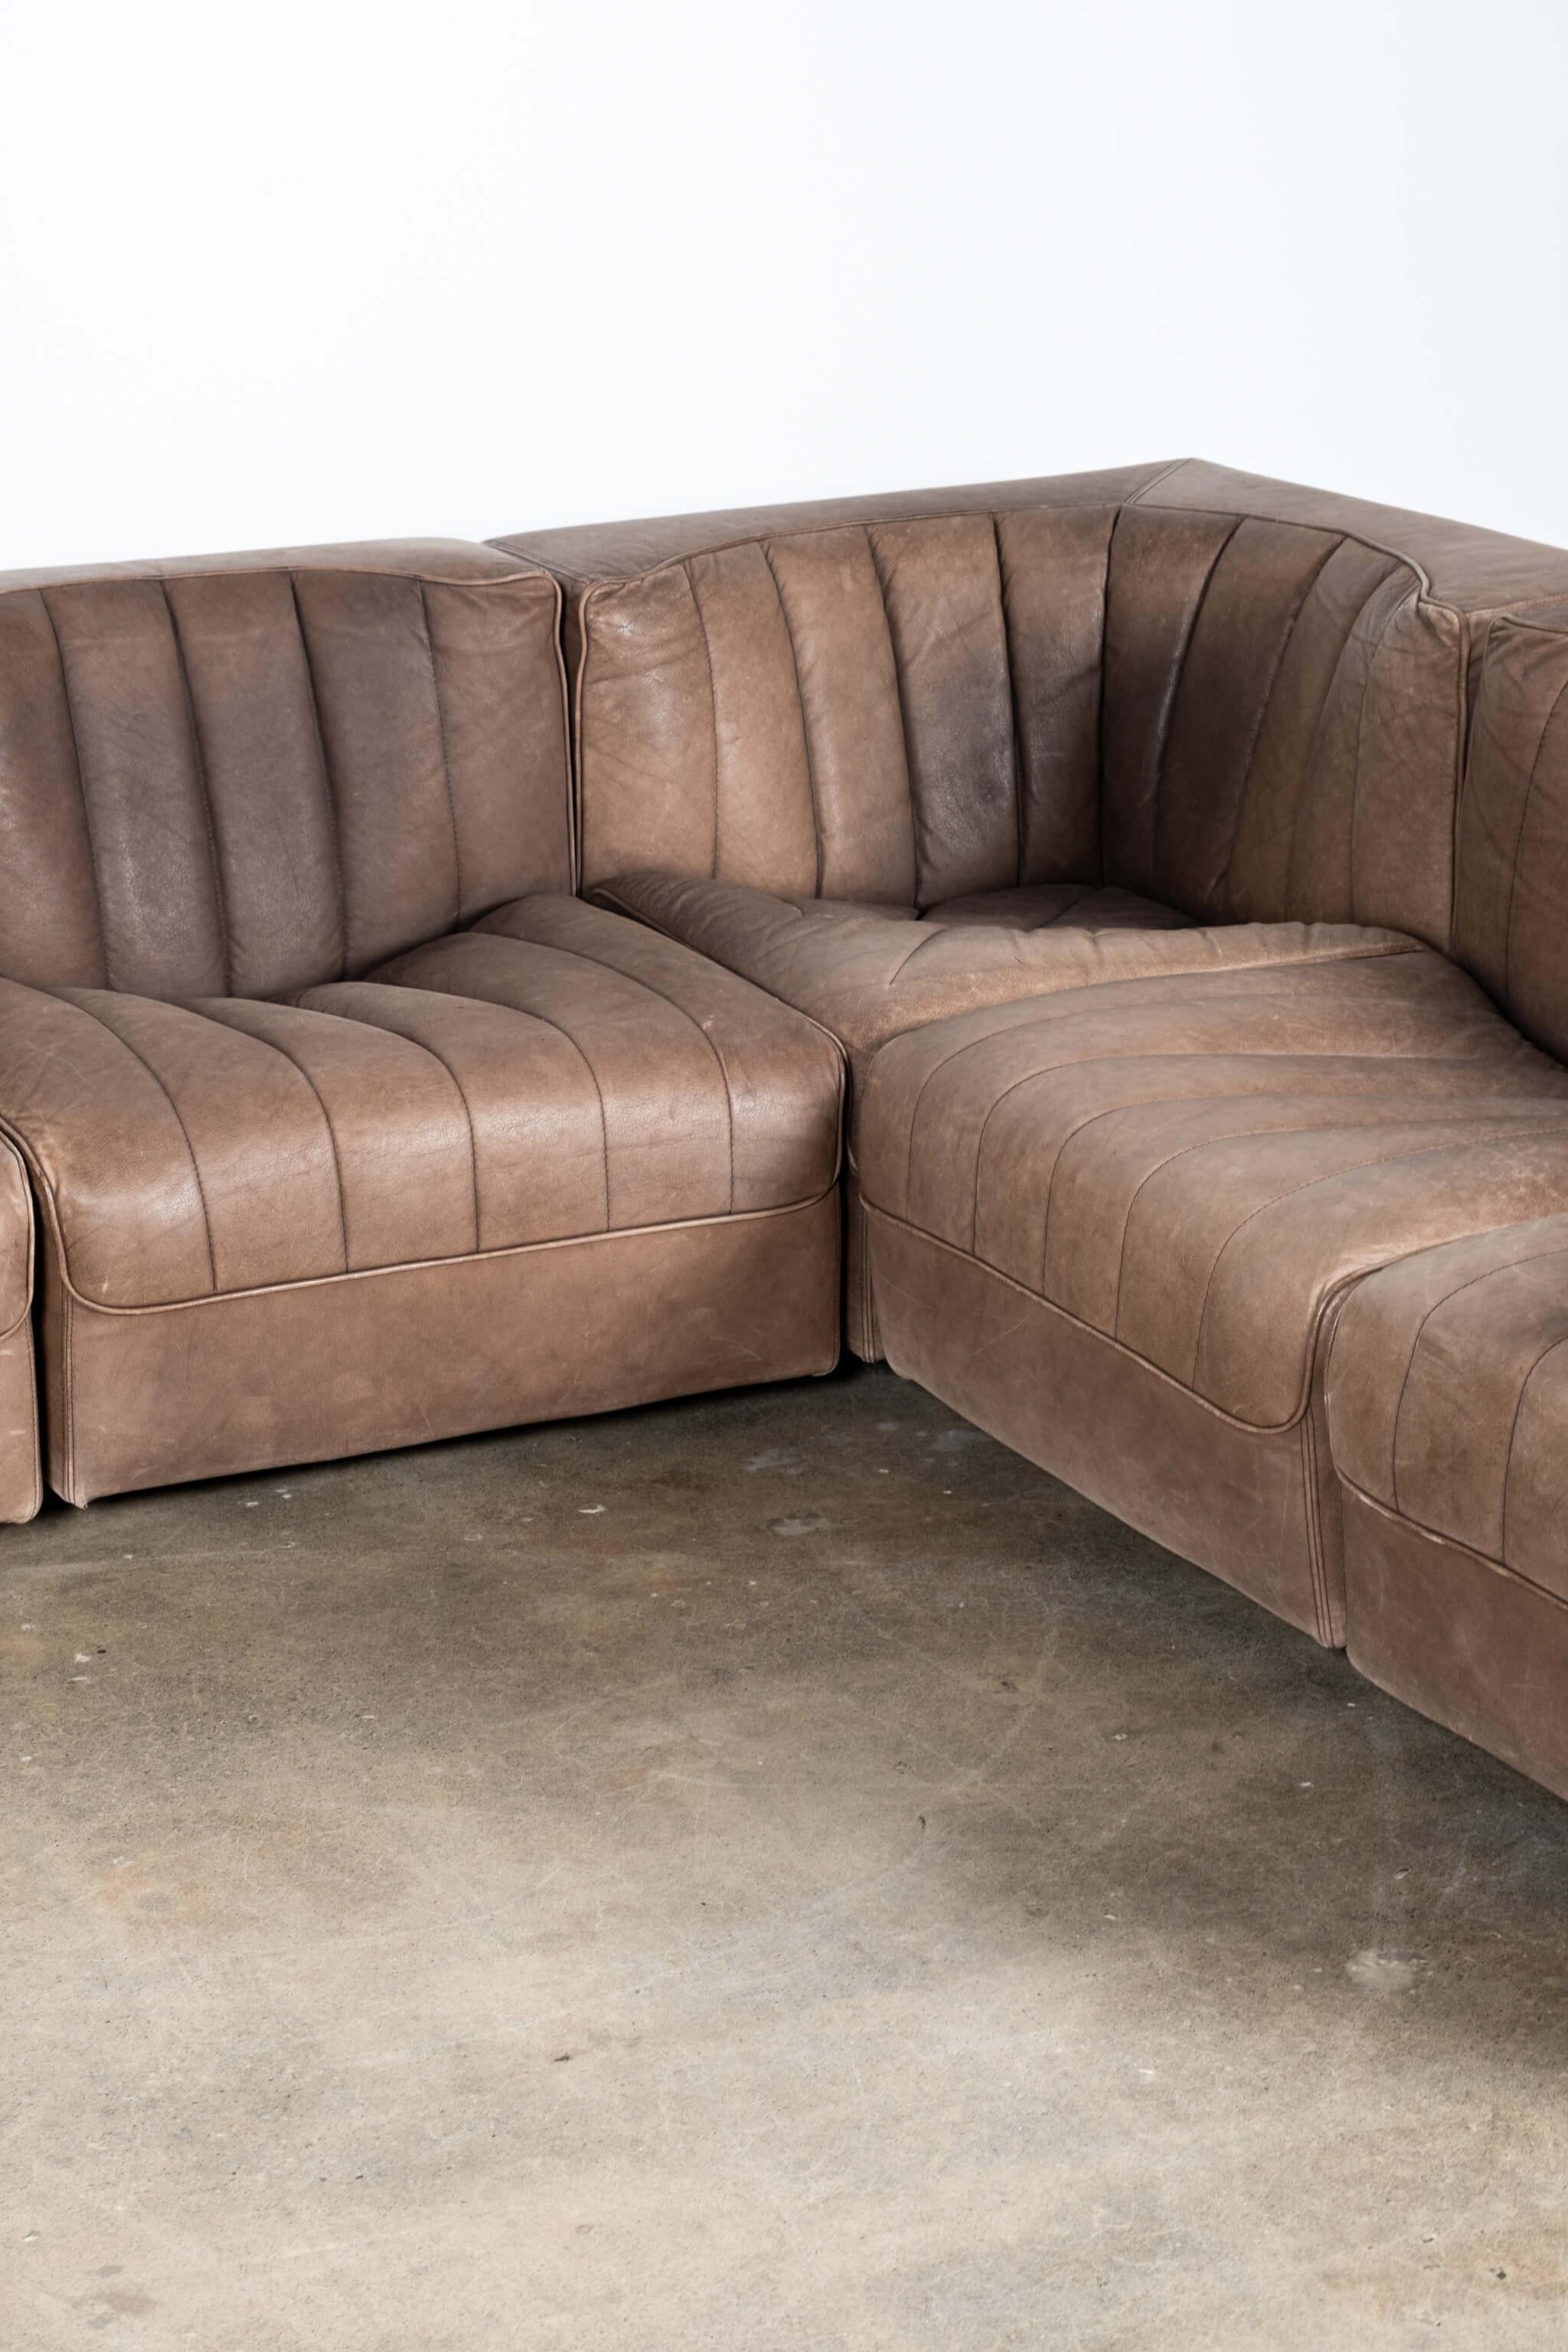 1970s Arflex 'Model 9000' Leather Sectional Sofa by Tito Agnoli For Sale 1